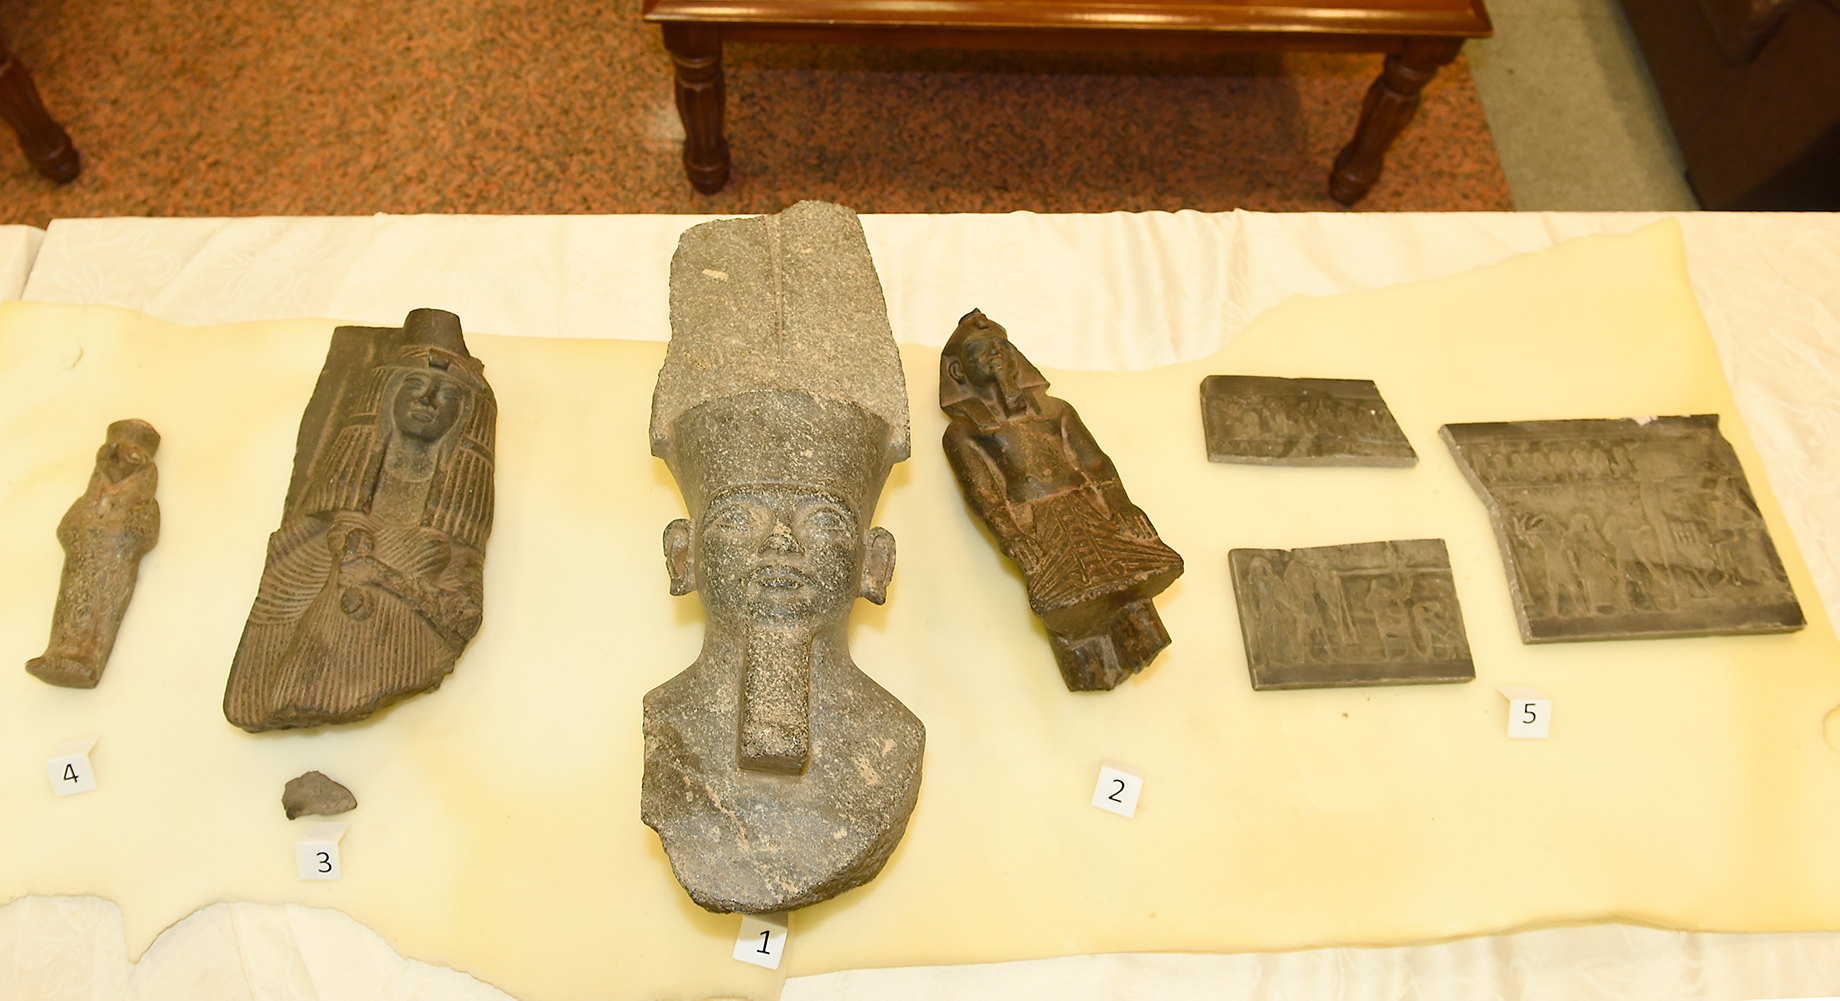 Pharaonic relics seized by customs authorities at Kuwait airport